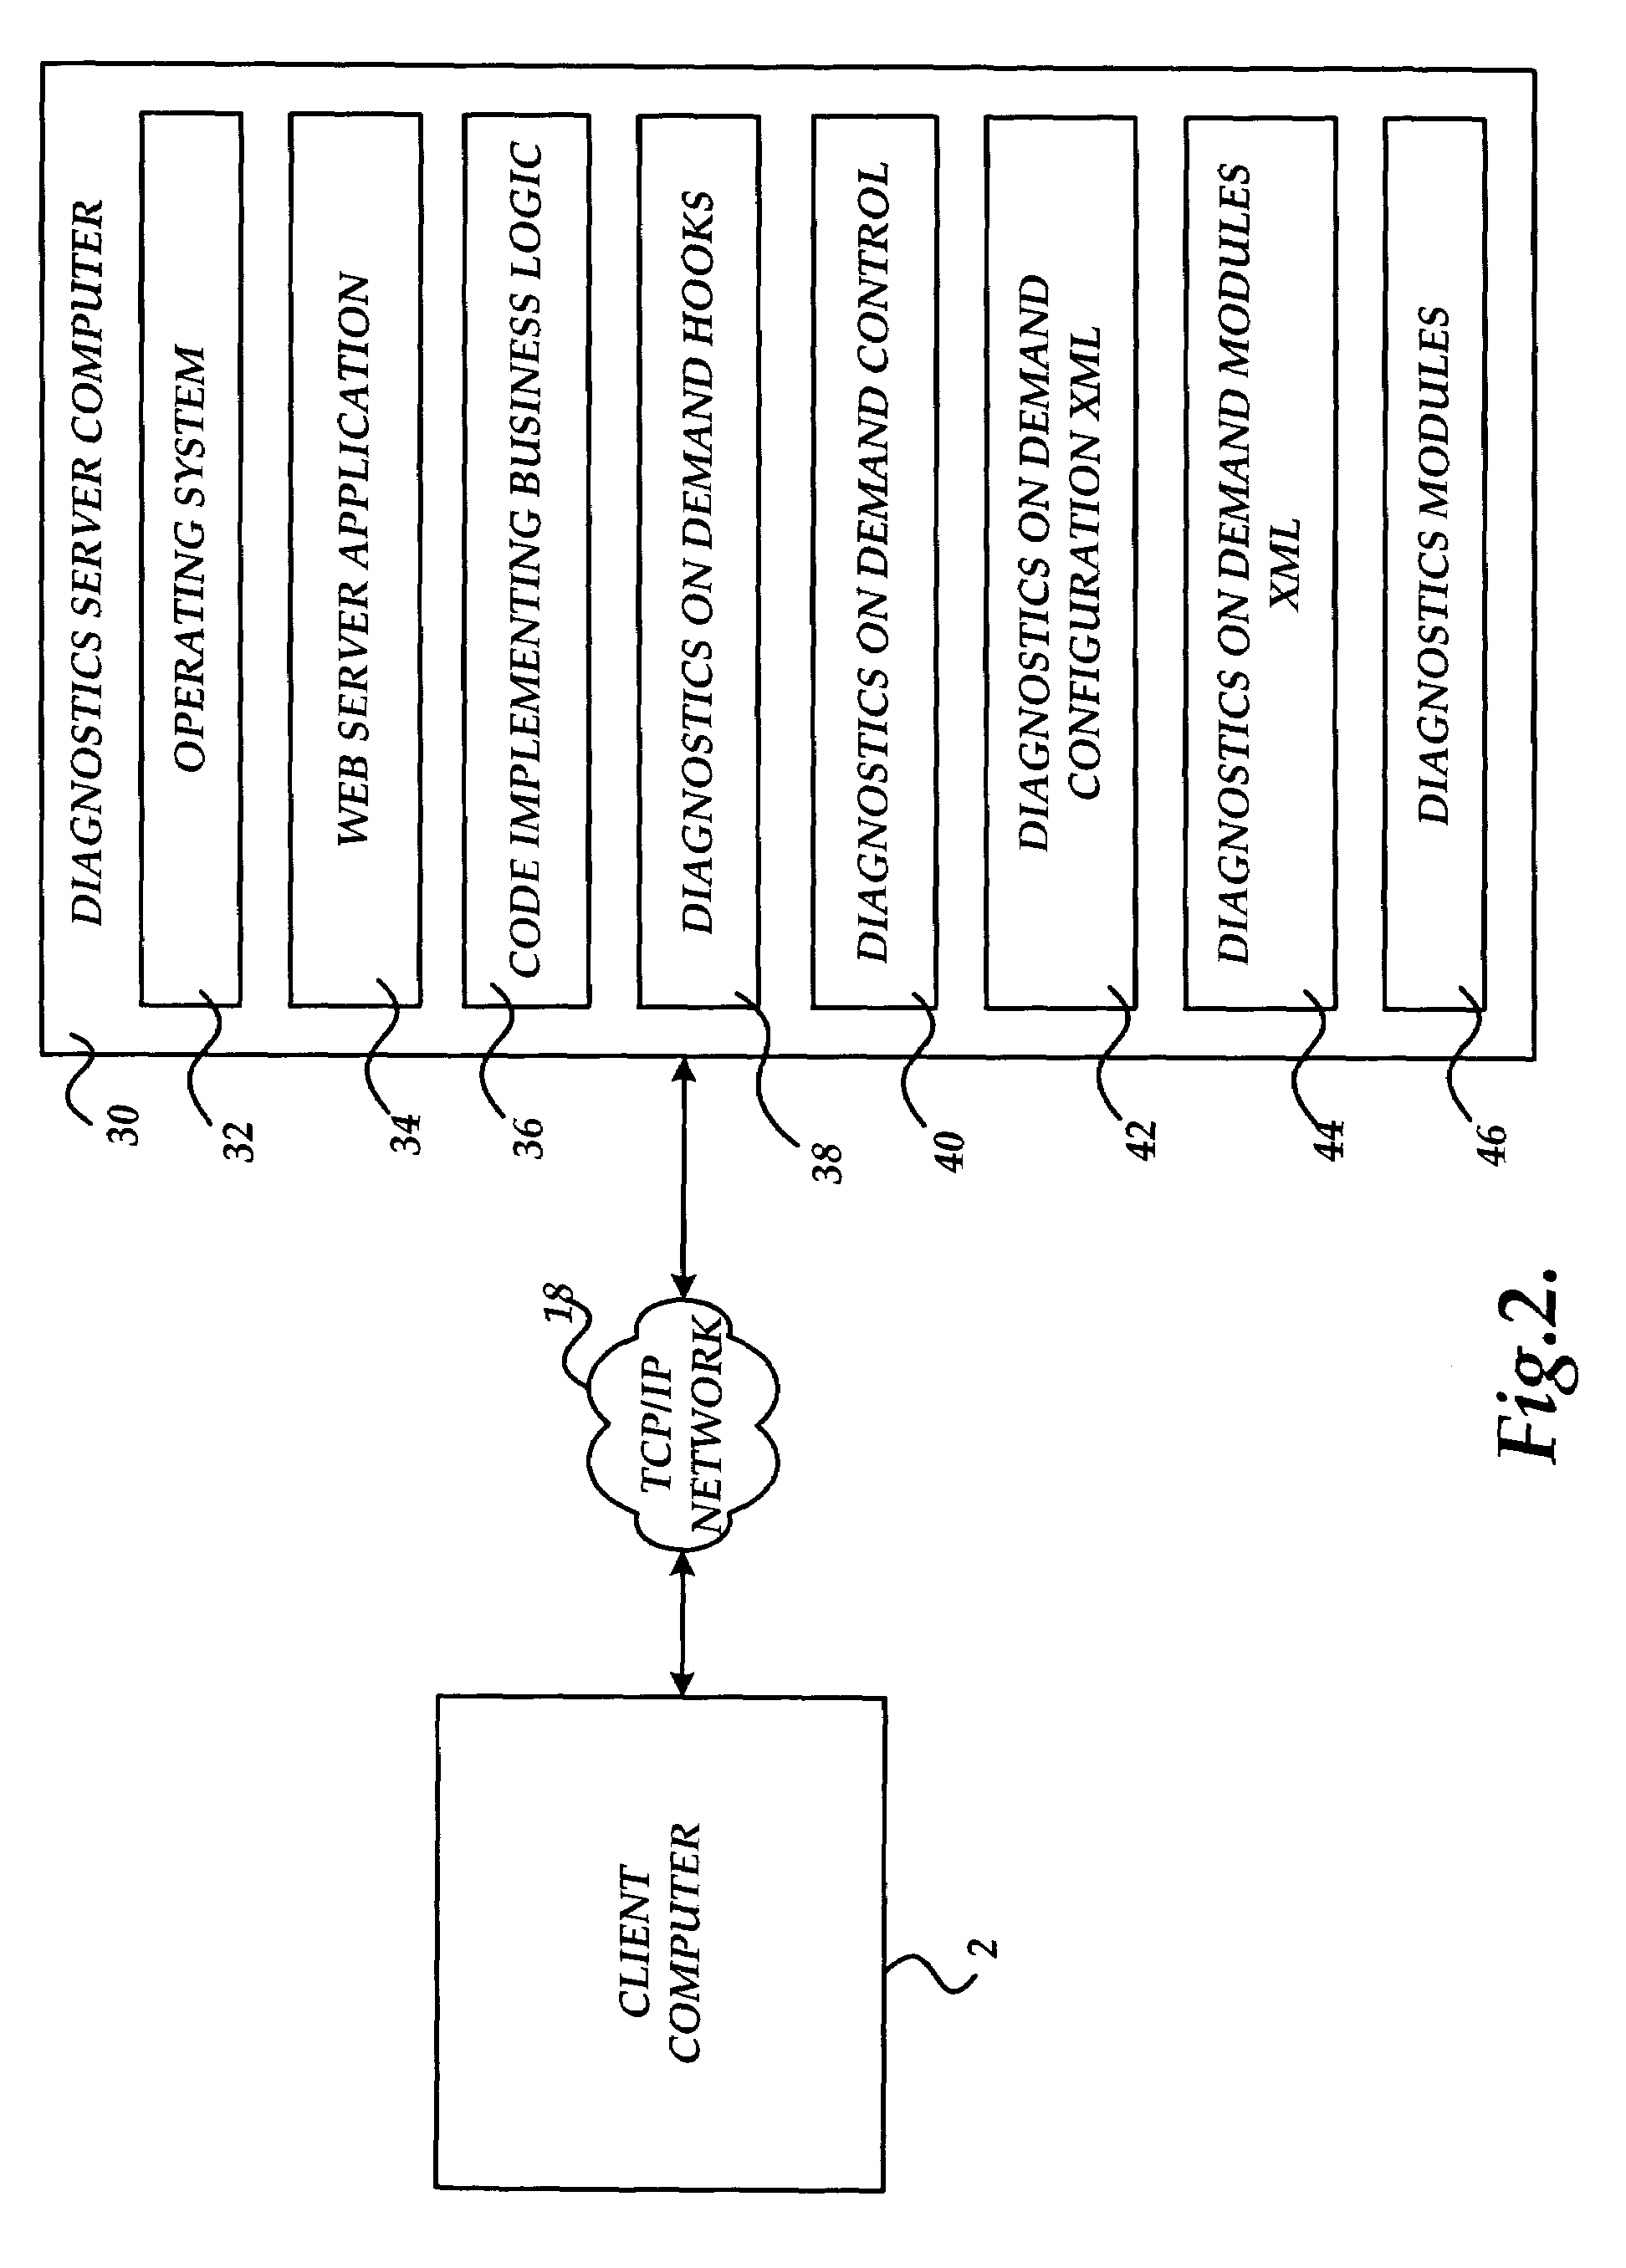 Method, system, and apparatus for providing a single diagnostics module on-demand